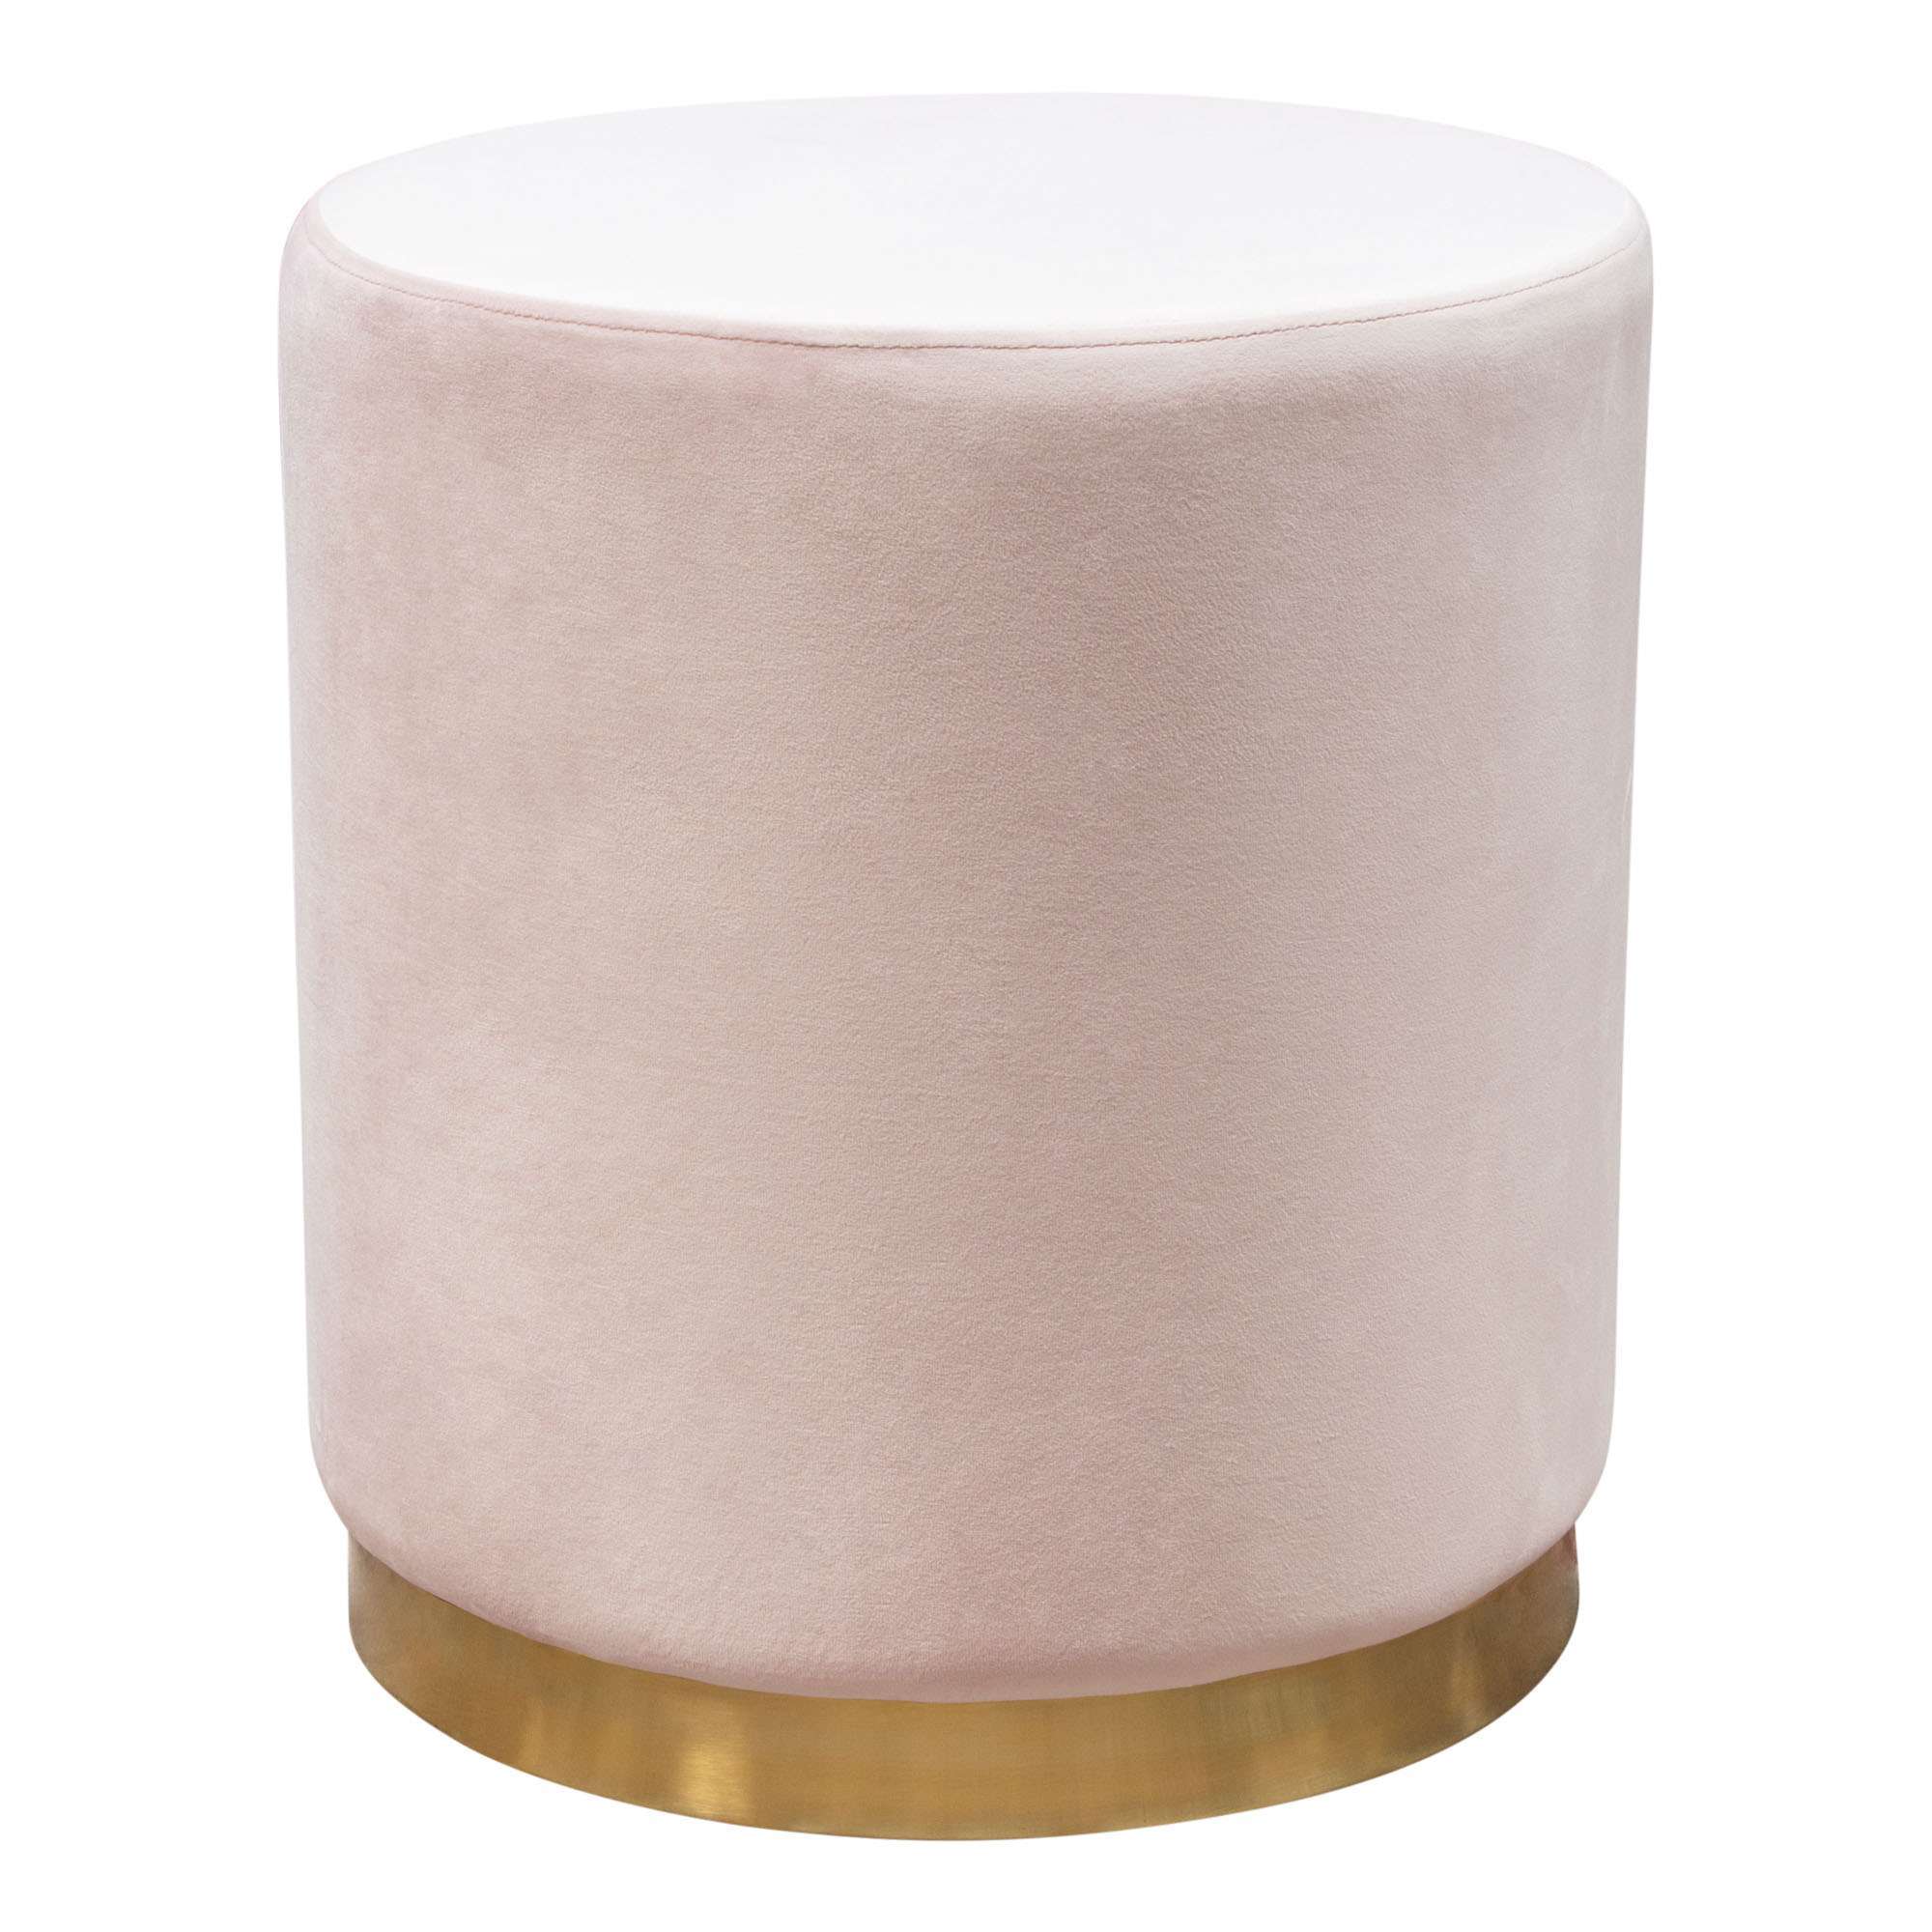 Sorbet Round Accent Ottoman in Blush Pink Velvet w/ Gold Metal Band Accent by Diamond Sofa - Decorian Group